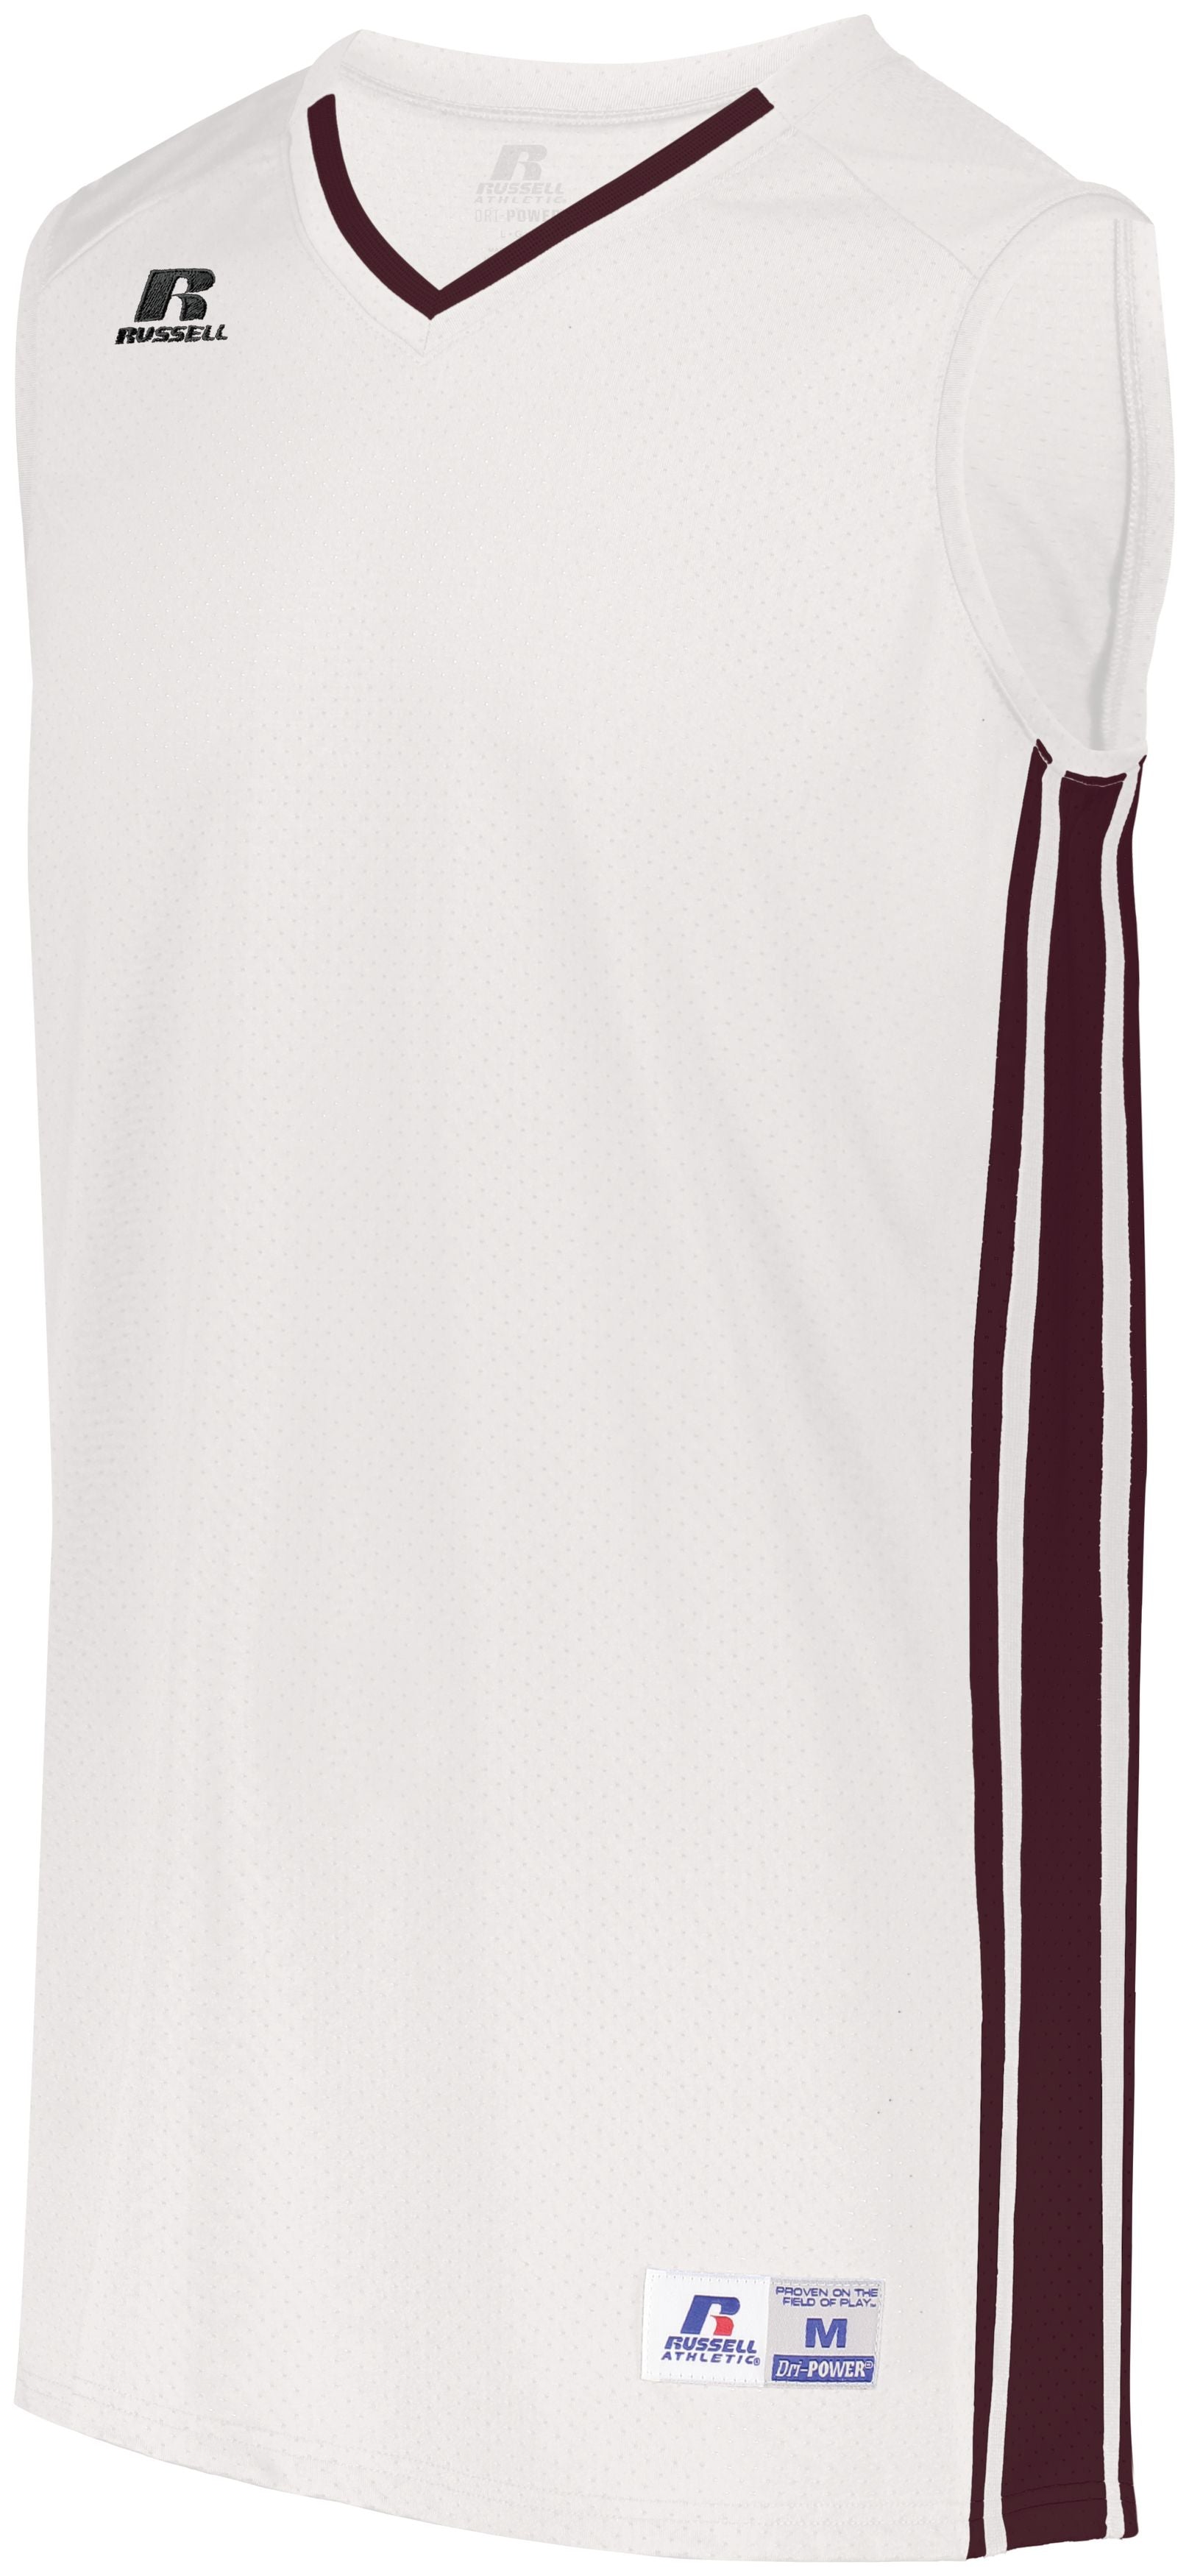 Russell Athletic Youth Legacy Basketball Jersey in White/Maroon  -Part of the Youth, Youth-Jersey, Basketball, Russell-Athletic-Products, Shirts, All-Sports, All-Sports-1 product lines at KanaleyCreations.com